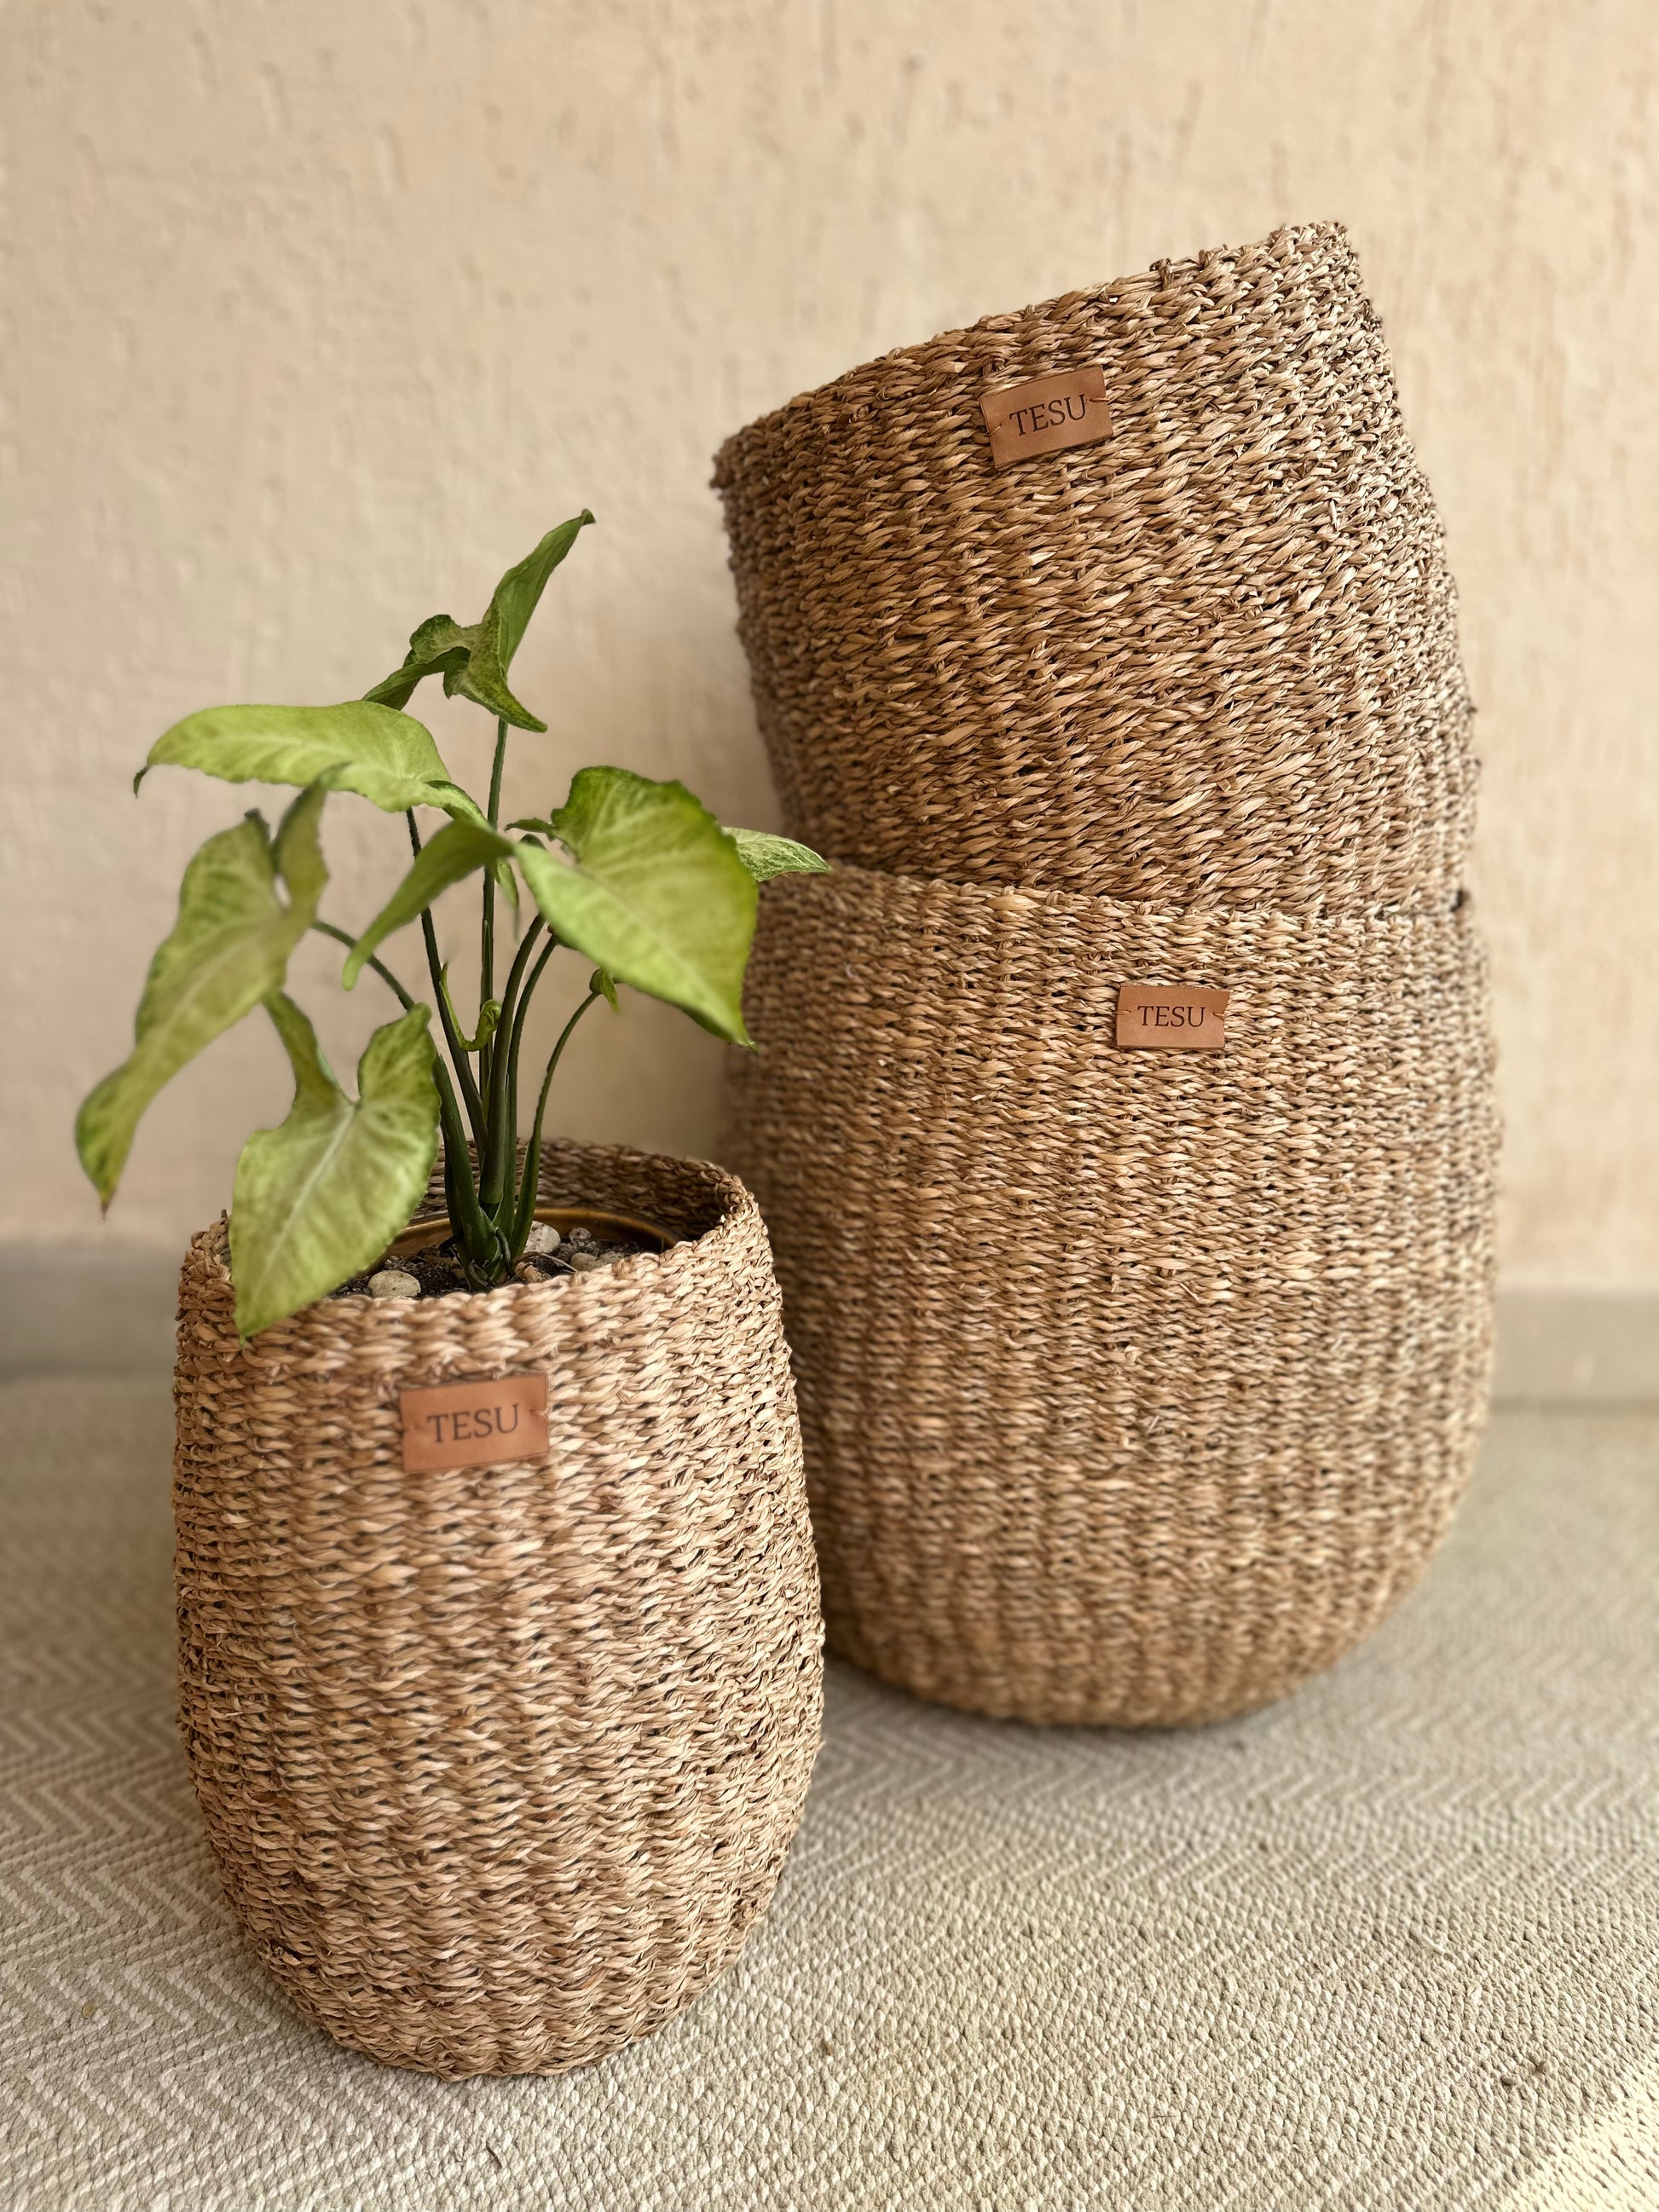 Enhance your Dream Home with our curated selection of premium Home Décor items. Seagrass Plant Holder are Perfect for decorating your home, living room decor, bedroom interior touches, beautiful cover pots and much more. Its placement is very flexible which is suitable for beautifying your room. Hand-woven by our artisans from sustainable Sea grass these storage baskets are great for storing and have high aesthetic appeal. tesu 